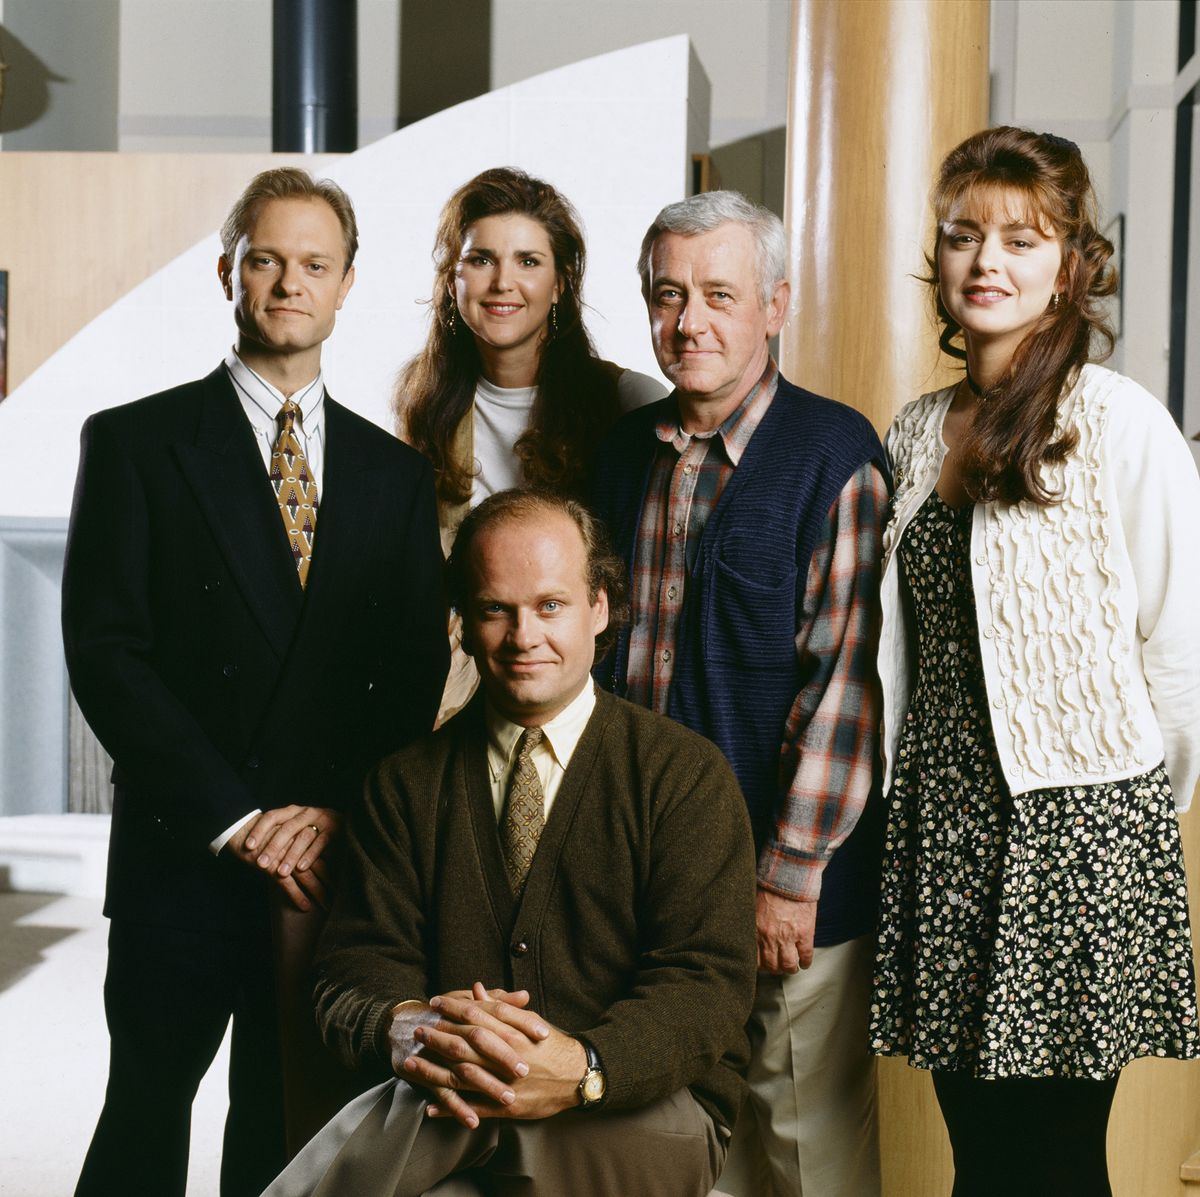 Where the Cast of 'Fraiser' is Now